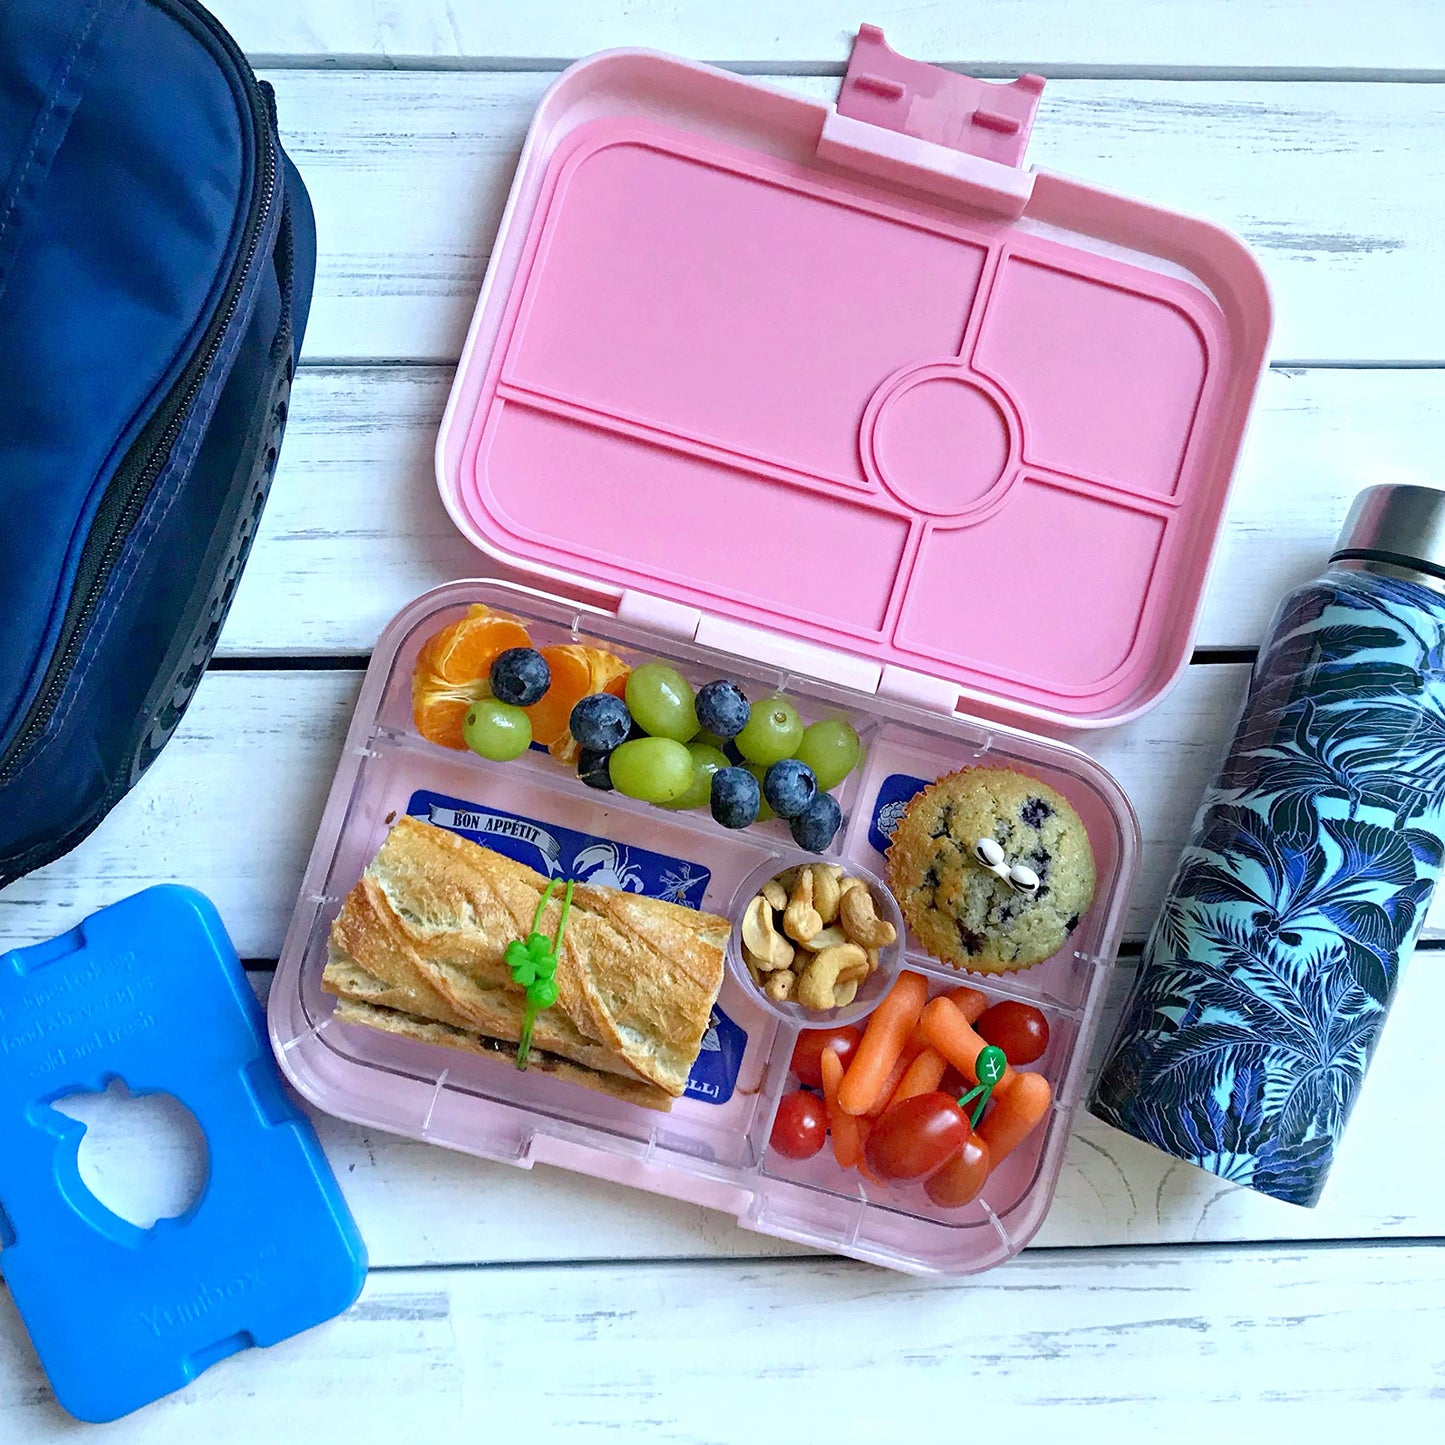 Yumbox Ice Packs (Set of 4) - Slim, Durable & Lightweight for Fresh Food - Perfect Bento Lunchbox, Coolers & More - Non-Toxic, BPA-Free - Opticdeals